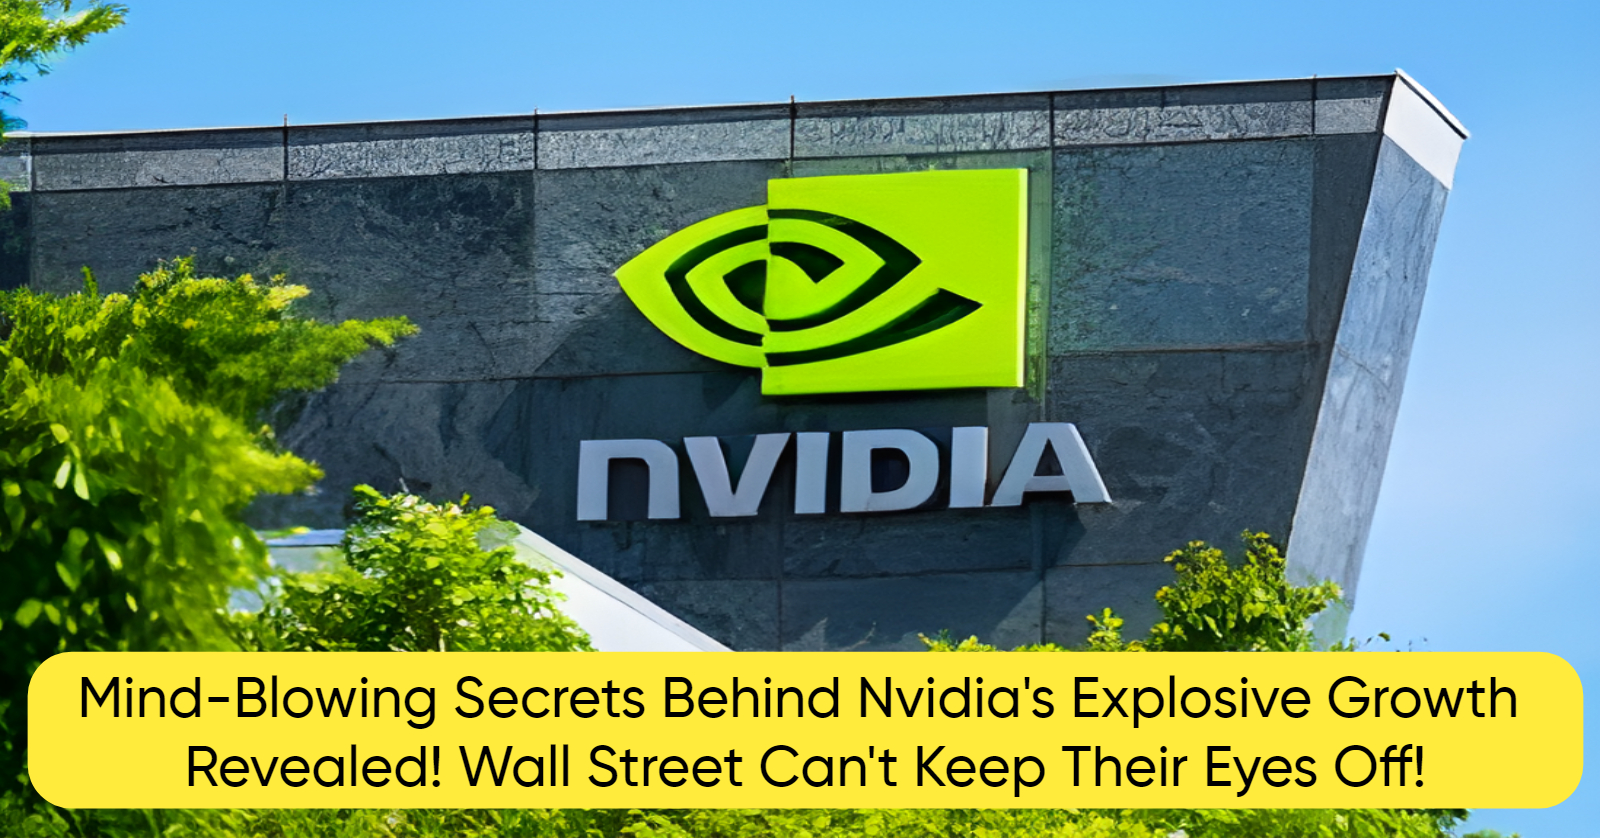 Mind-Blowing Secrets Behind Nvidia's Explosive Growth Revealed! Wall Street Can't Keep Their Eyes Off!